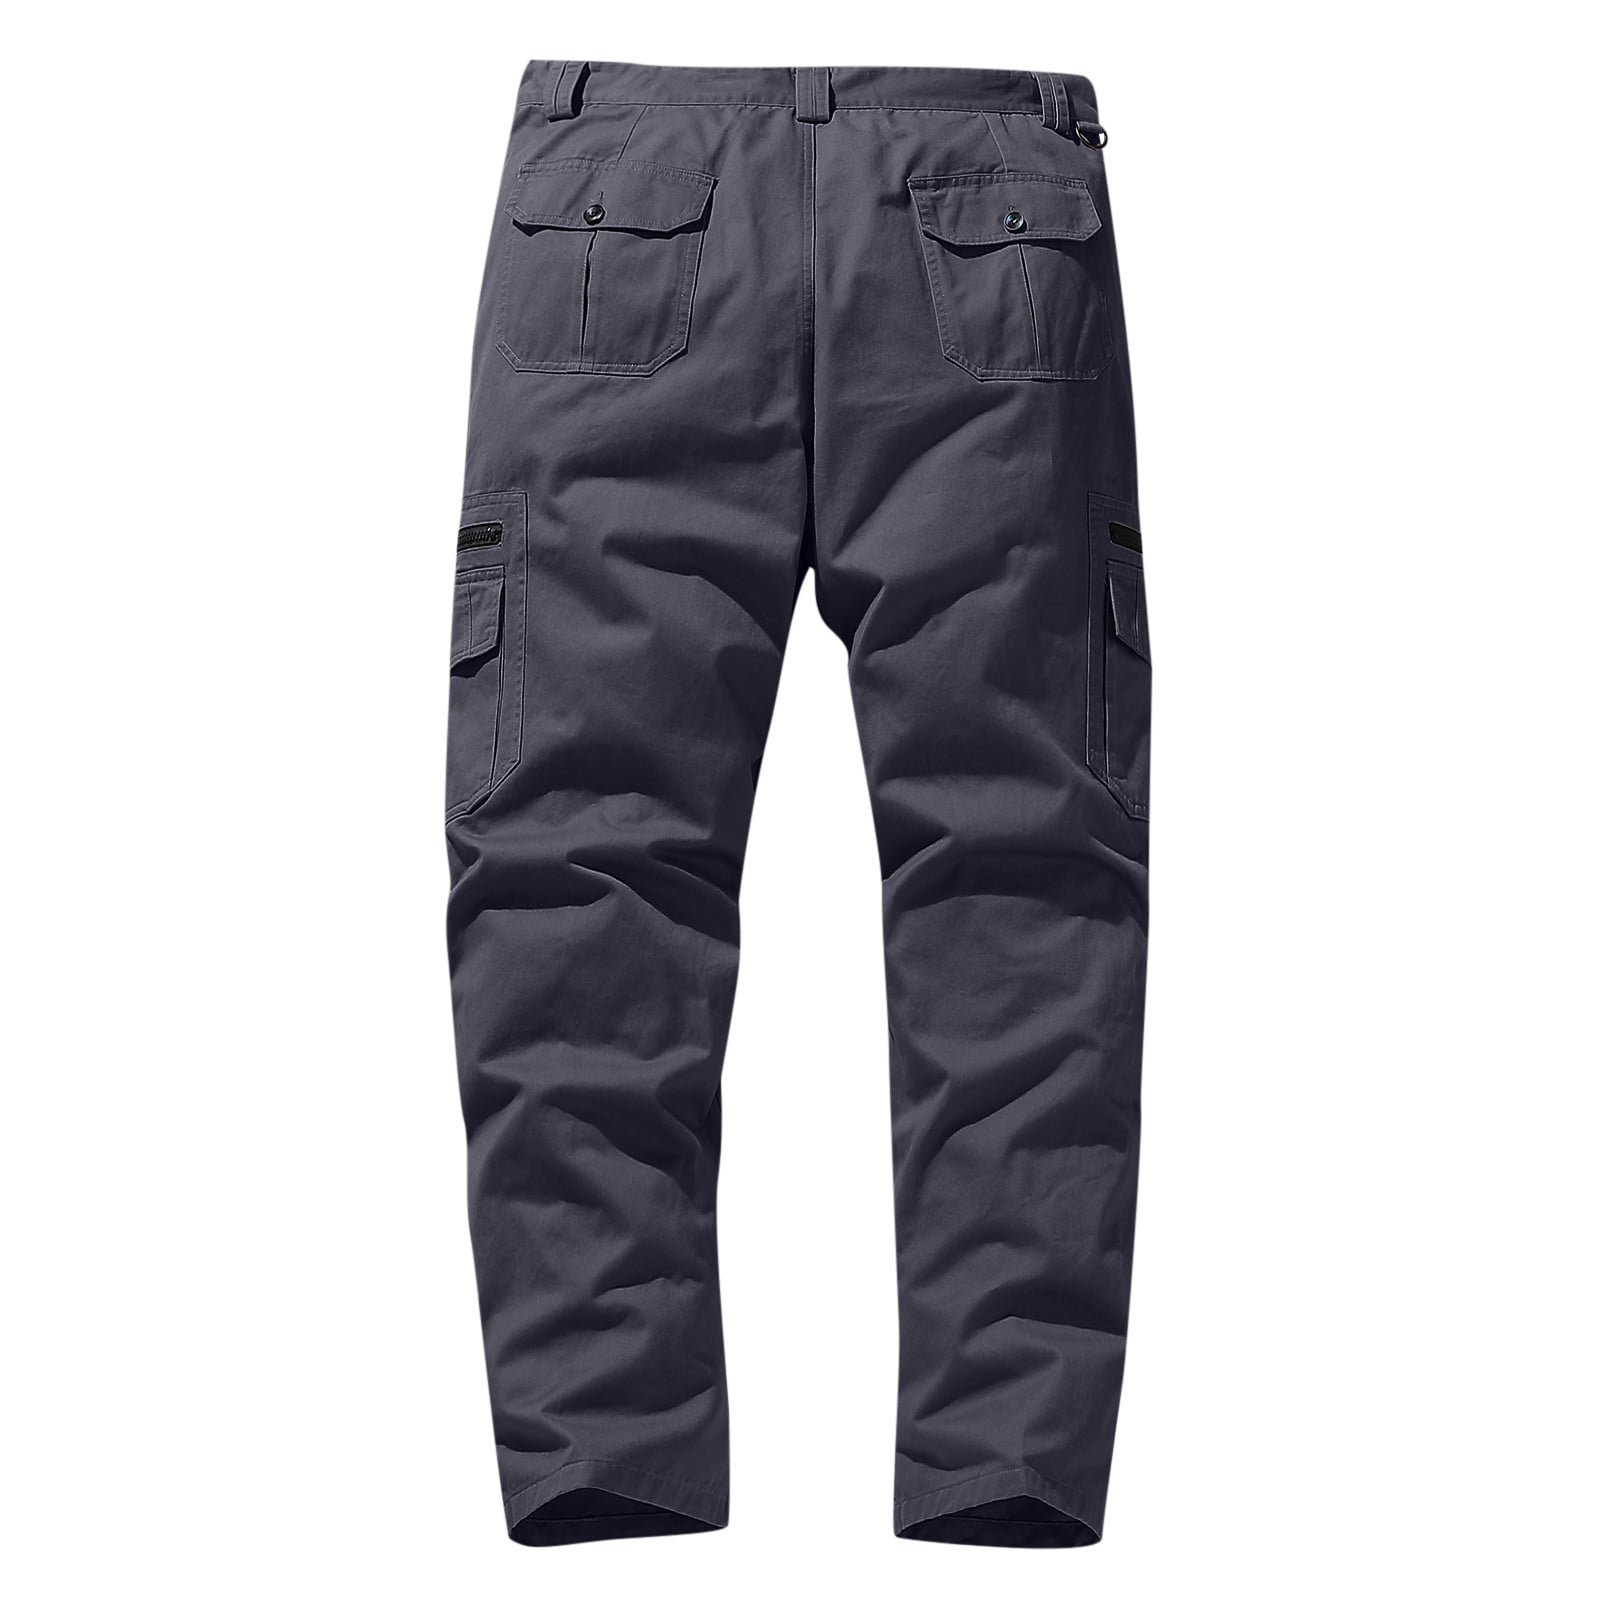 Mens Military Cargo Pants With Multiple Pockets Stretchable Cotton Army  Trousers Mens For Combat, SWAT, And Casual Wear Available In Plus Sizes 28  40.5x From Herish, $16.73 | DHgate.Com